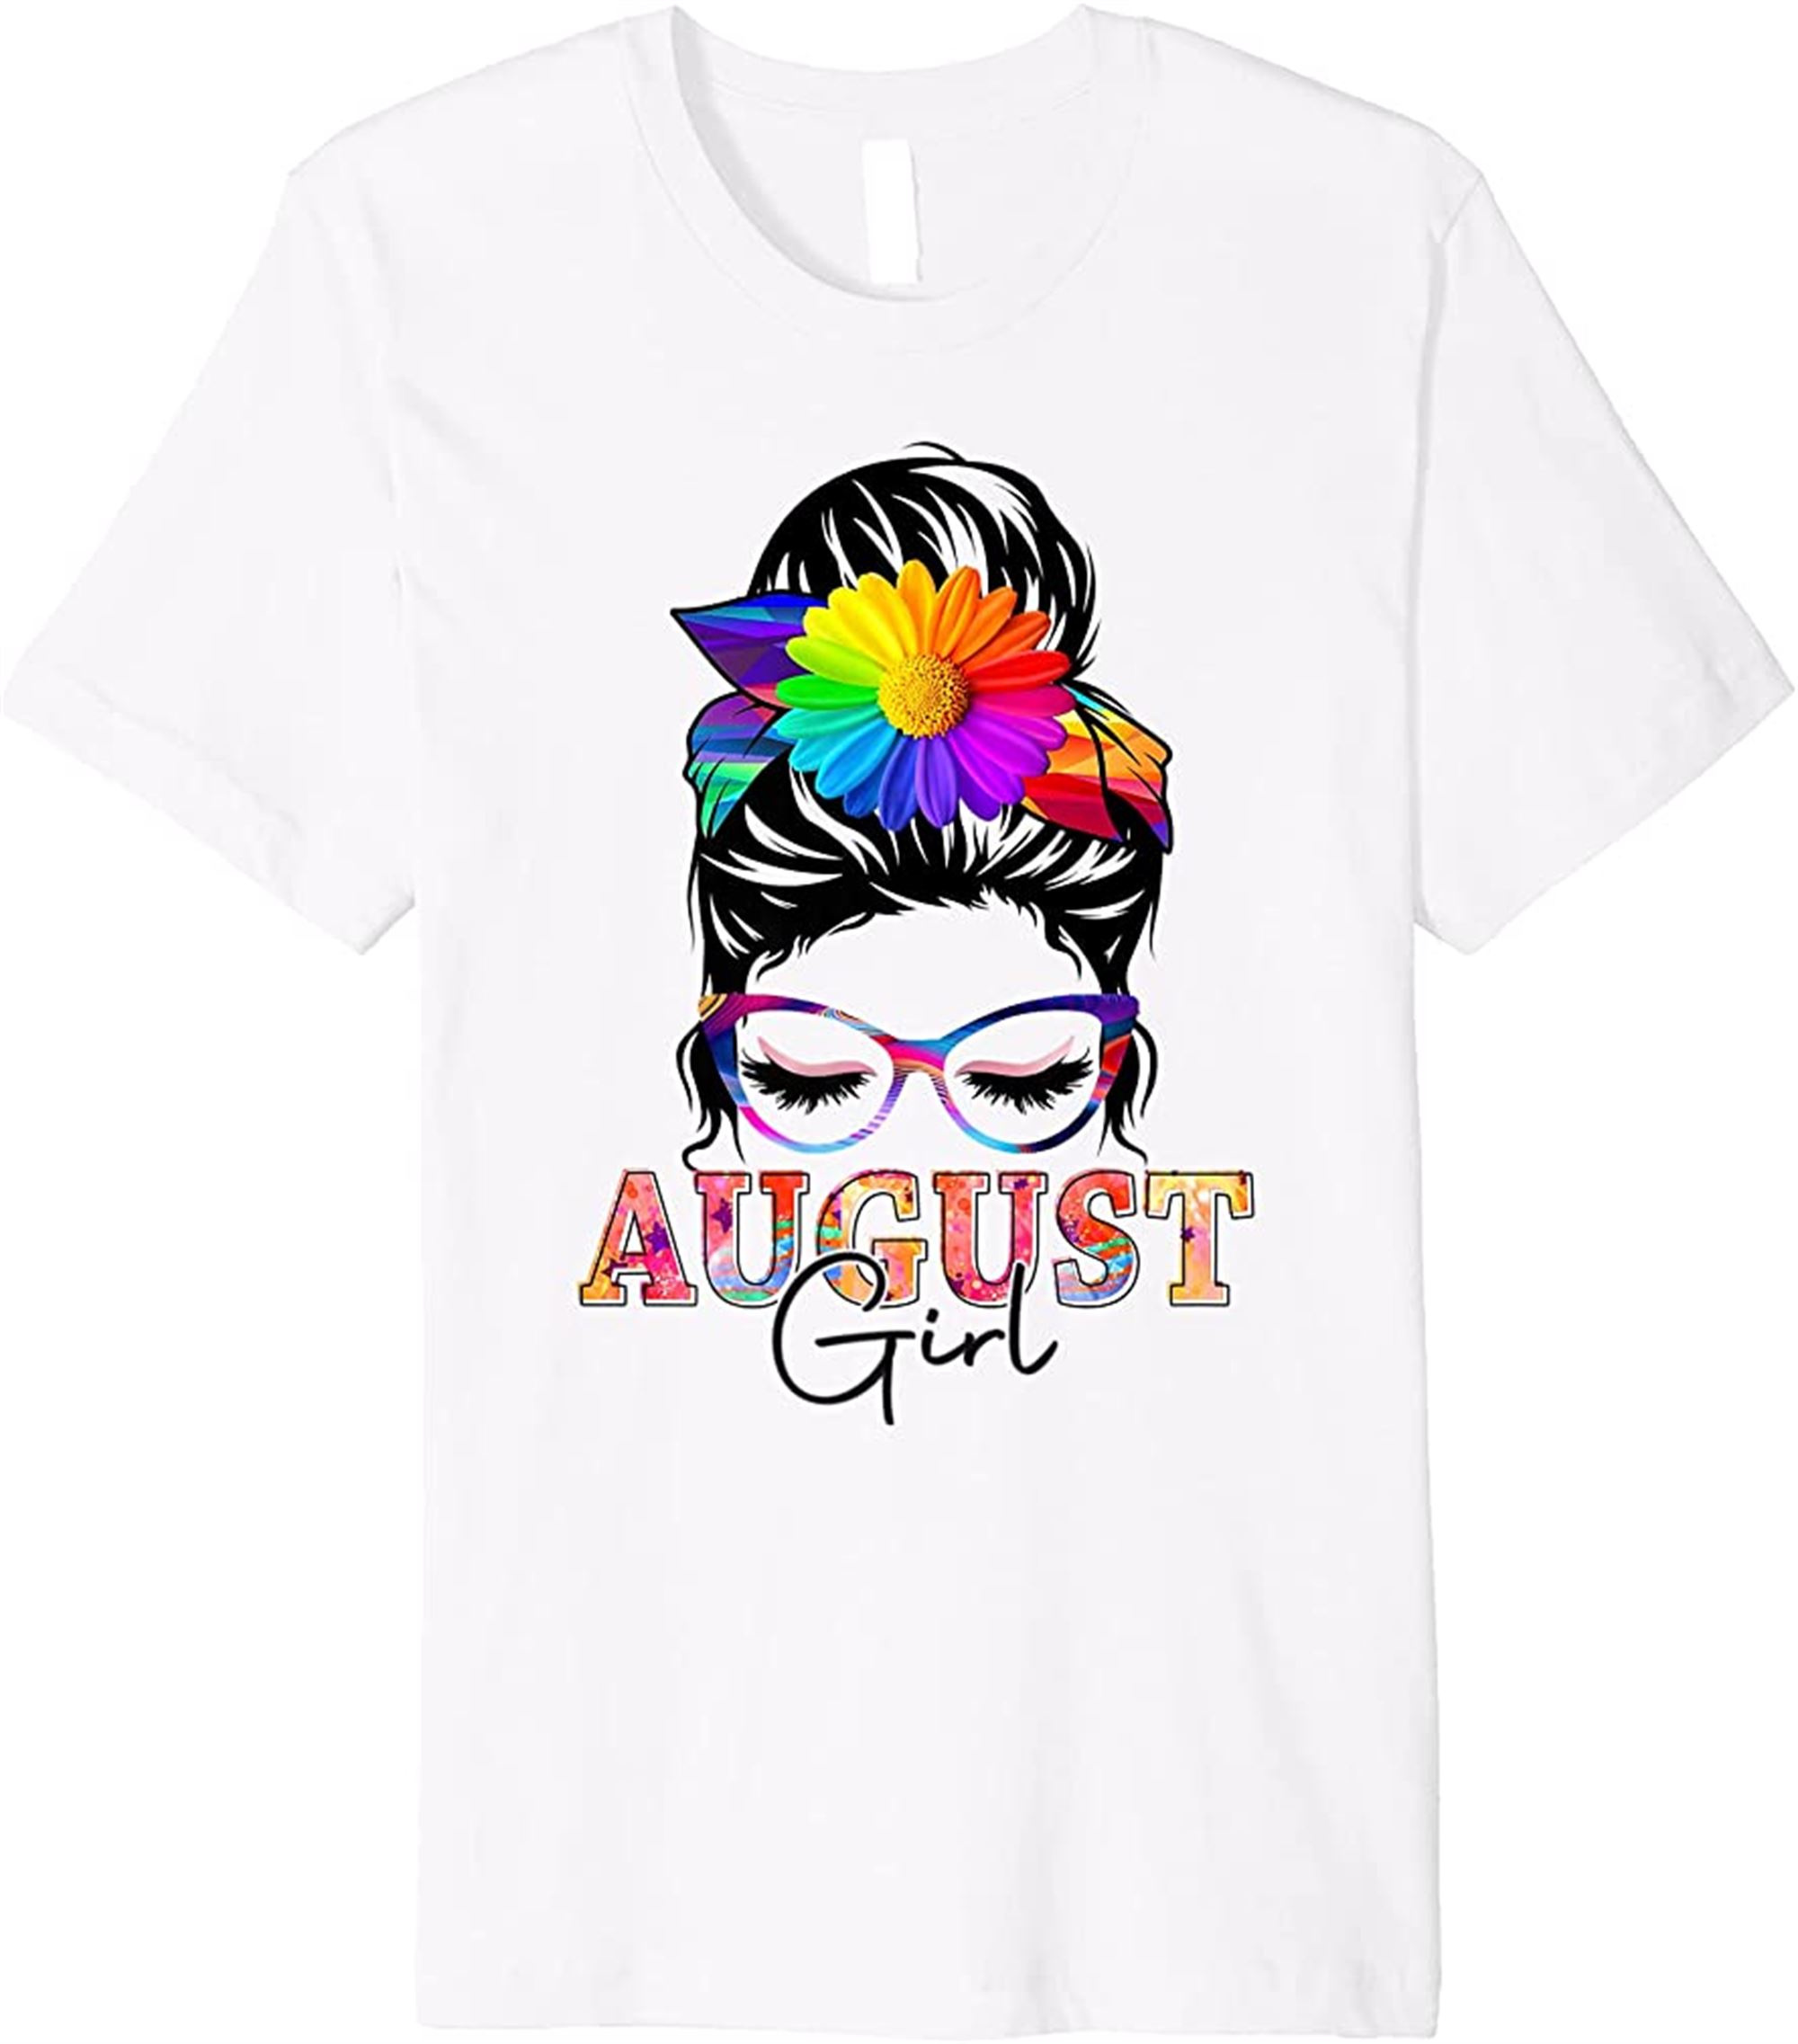 Women August Girl Birthday Messy Bun Colorful Floral Premium T-shirt Plus Size Up To 5xl